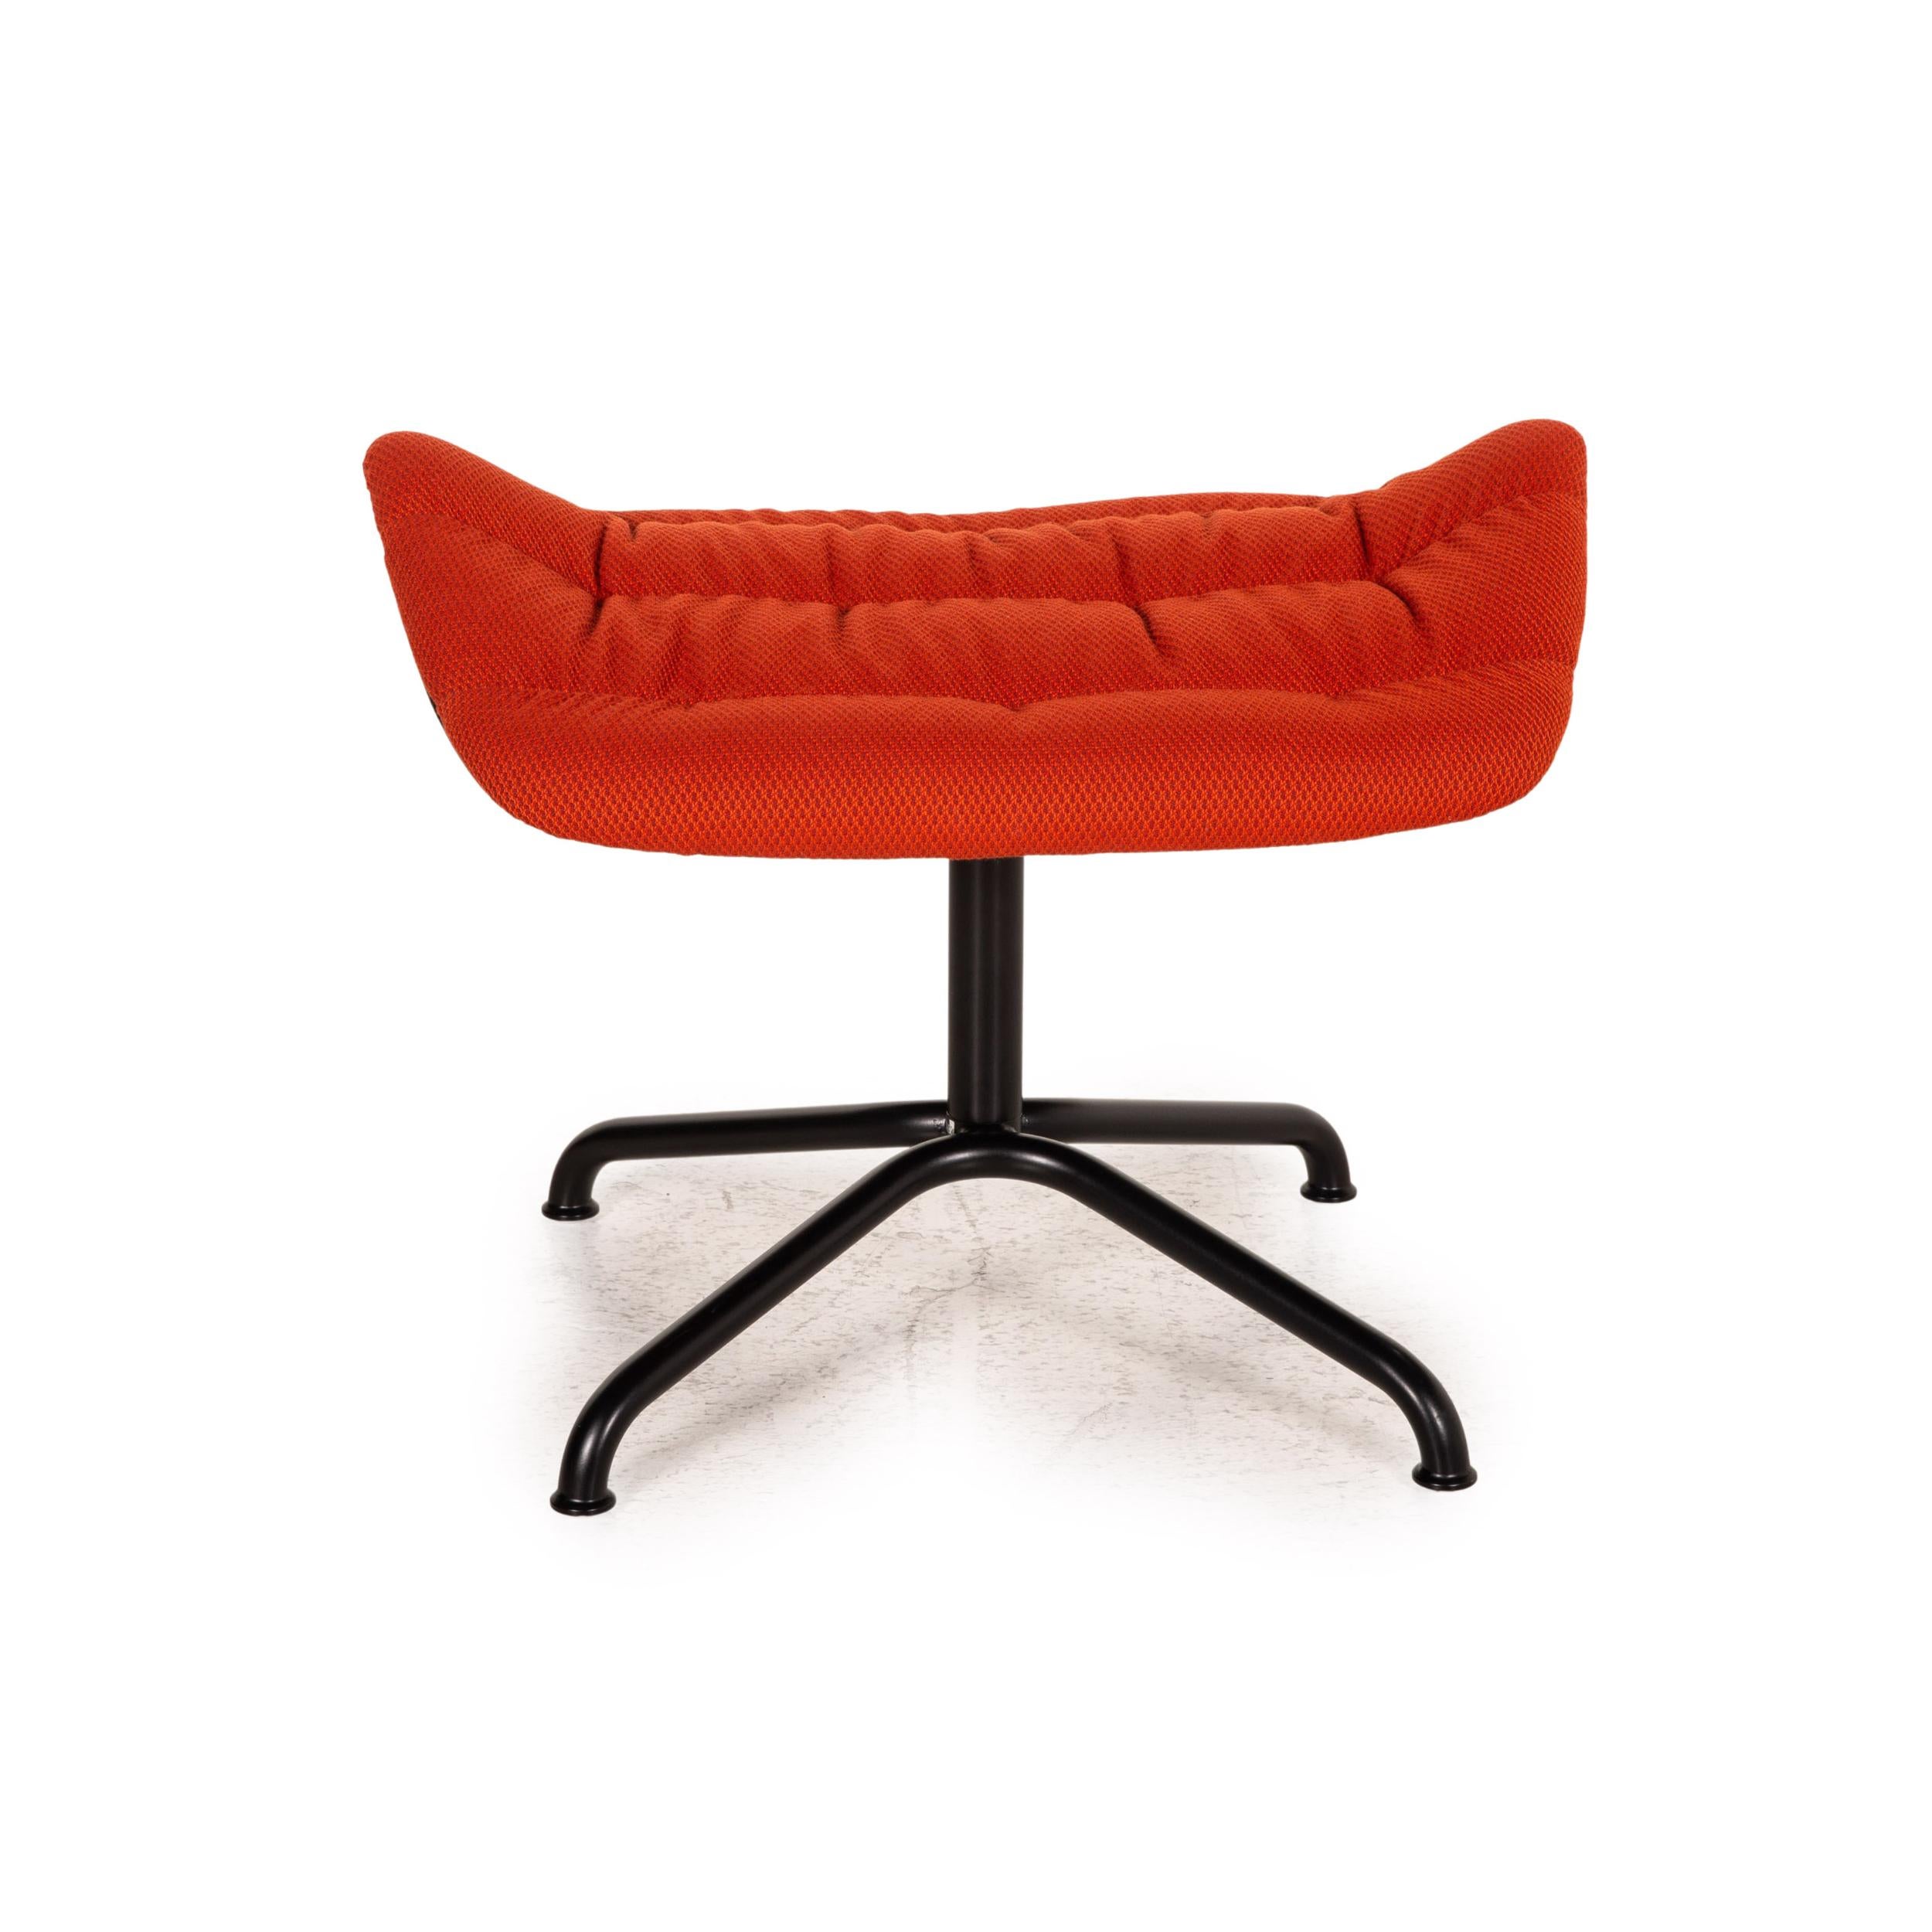 Thonet 808 Fabric Armchair Incl. Stool Orange Armchair Function Relax Function For Sale 8